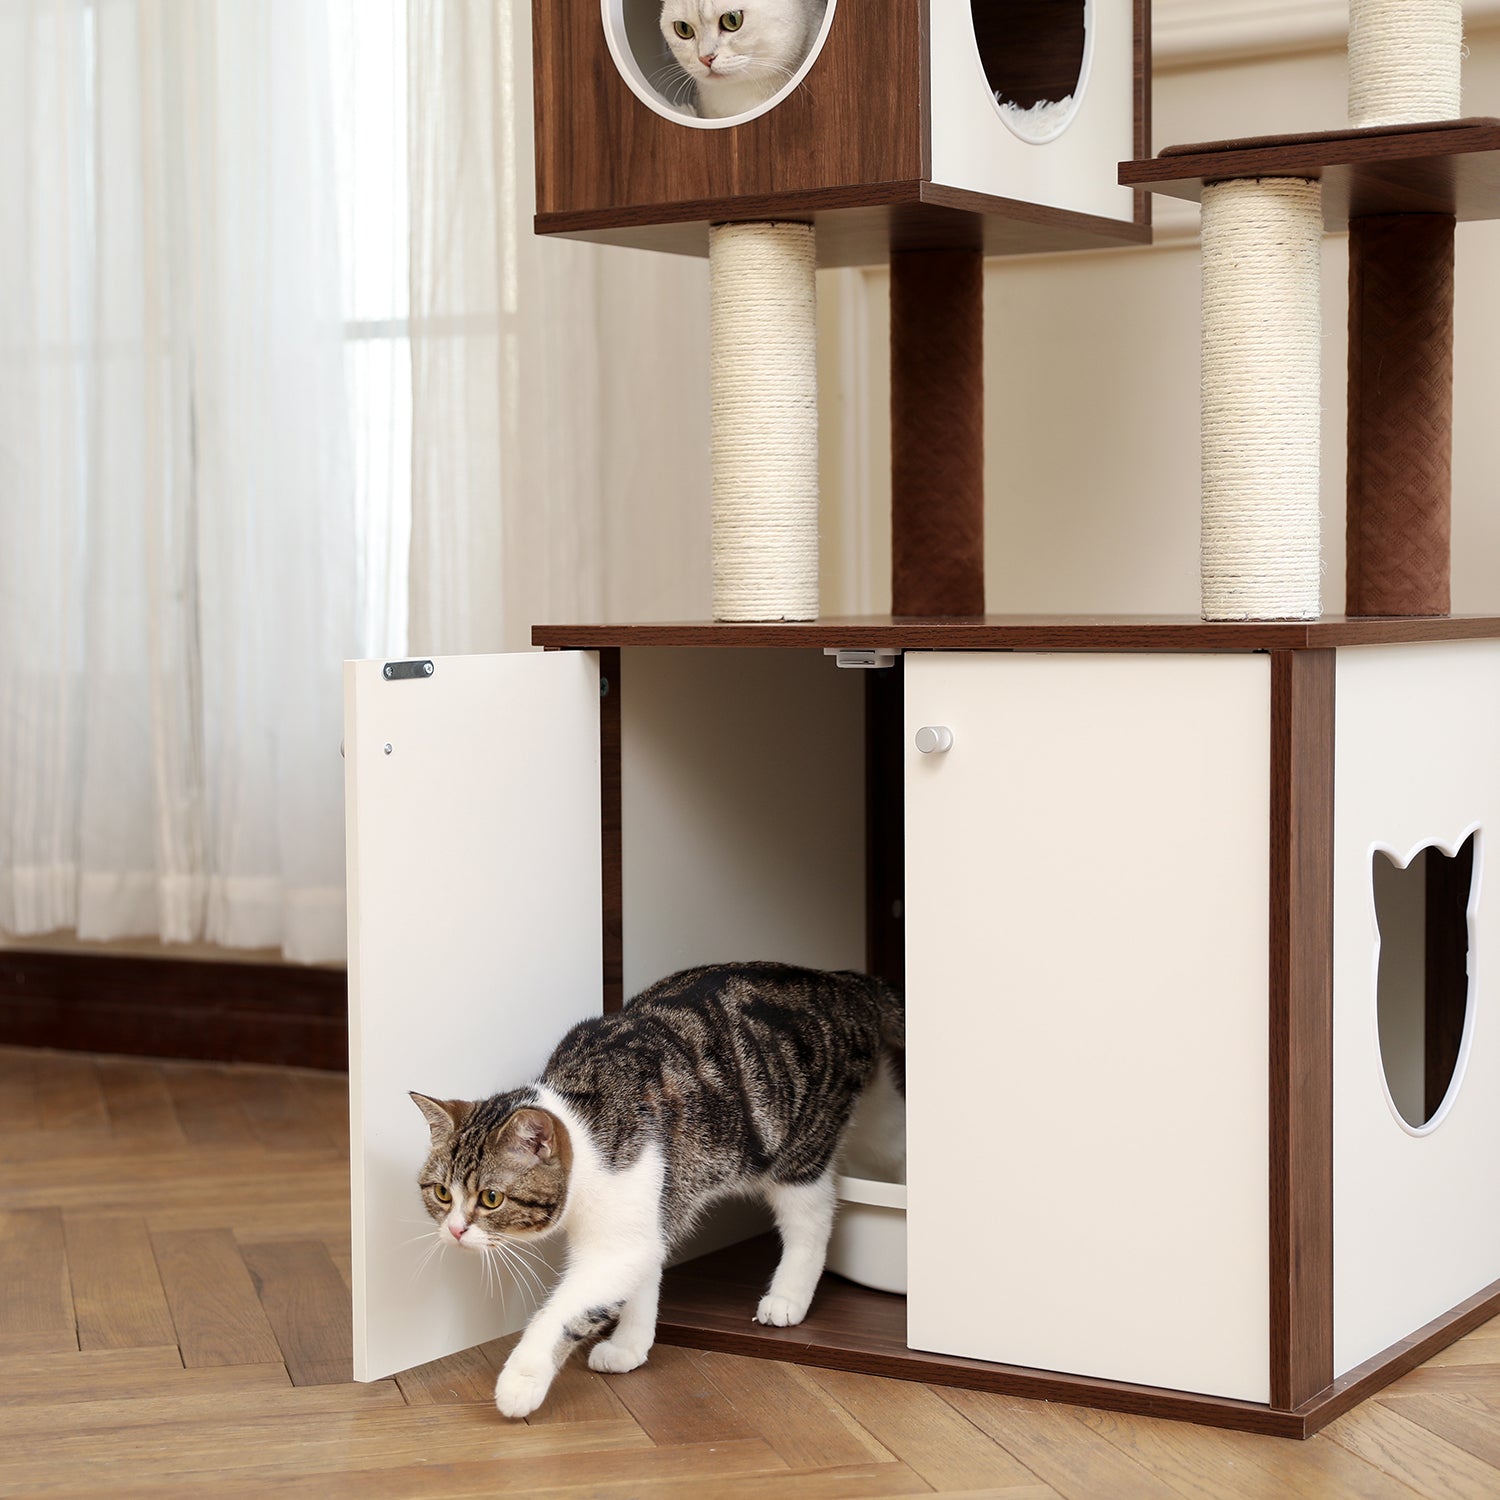 Brown All-in-One Cat Tree Tower with Multi-Functional Washroom Litter Box, Condo, Perch, Hammock, and Scratching Post for Cats